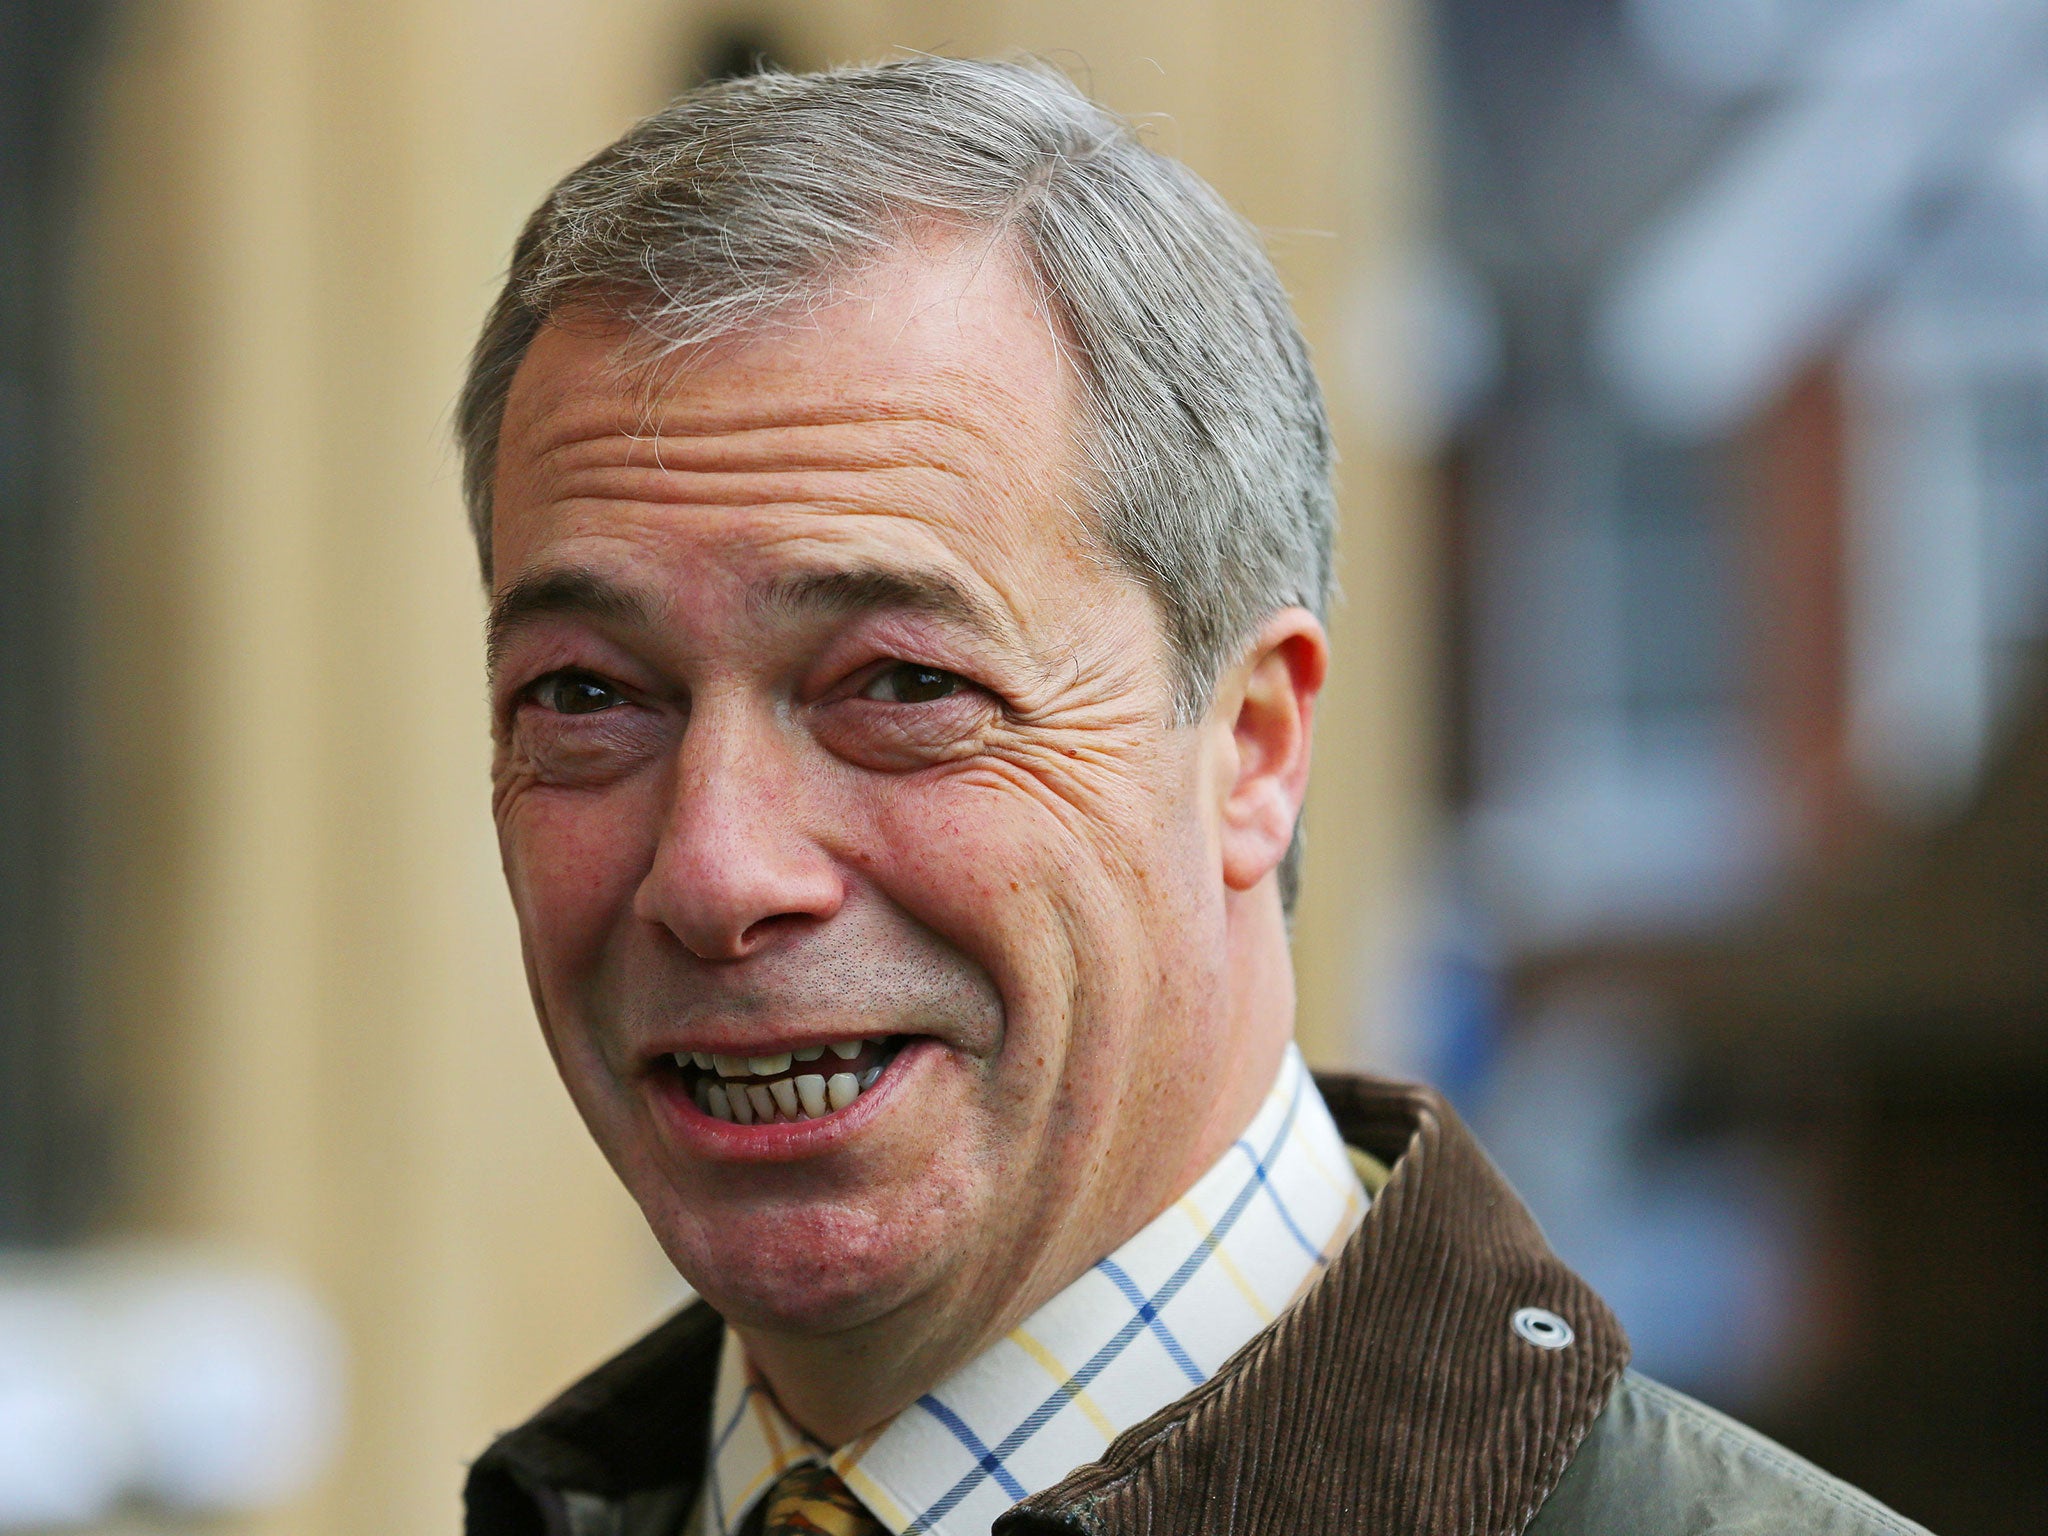 Nigel Farage distanced himself from Ms Atkinson and vowed to restore 'decency' to politics